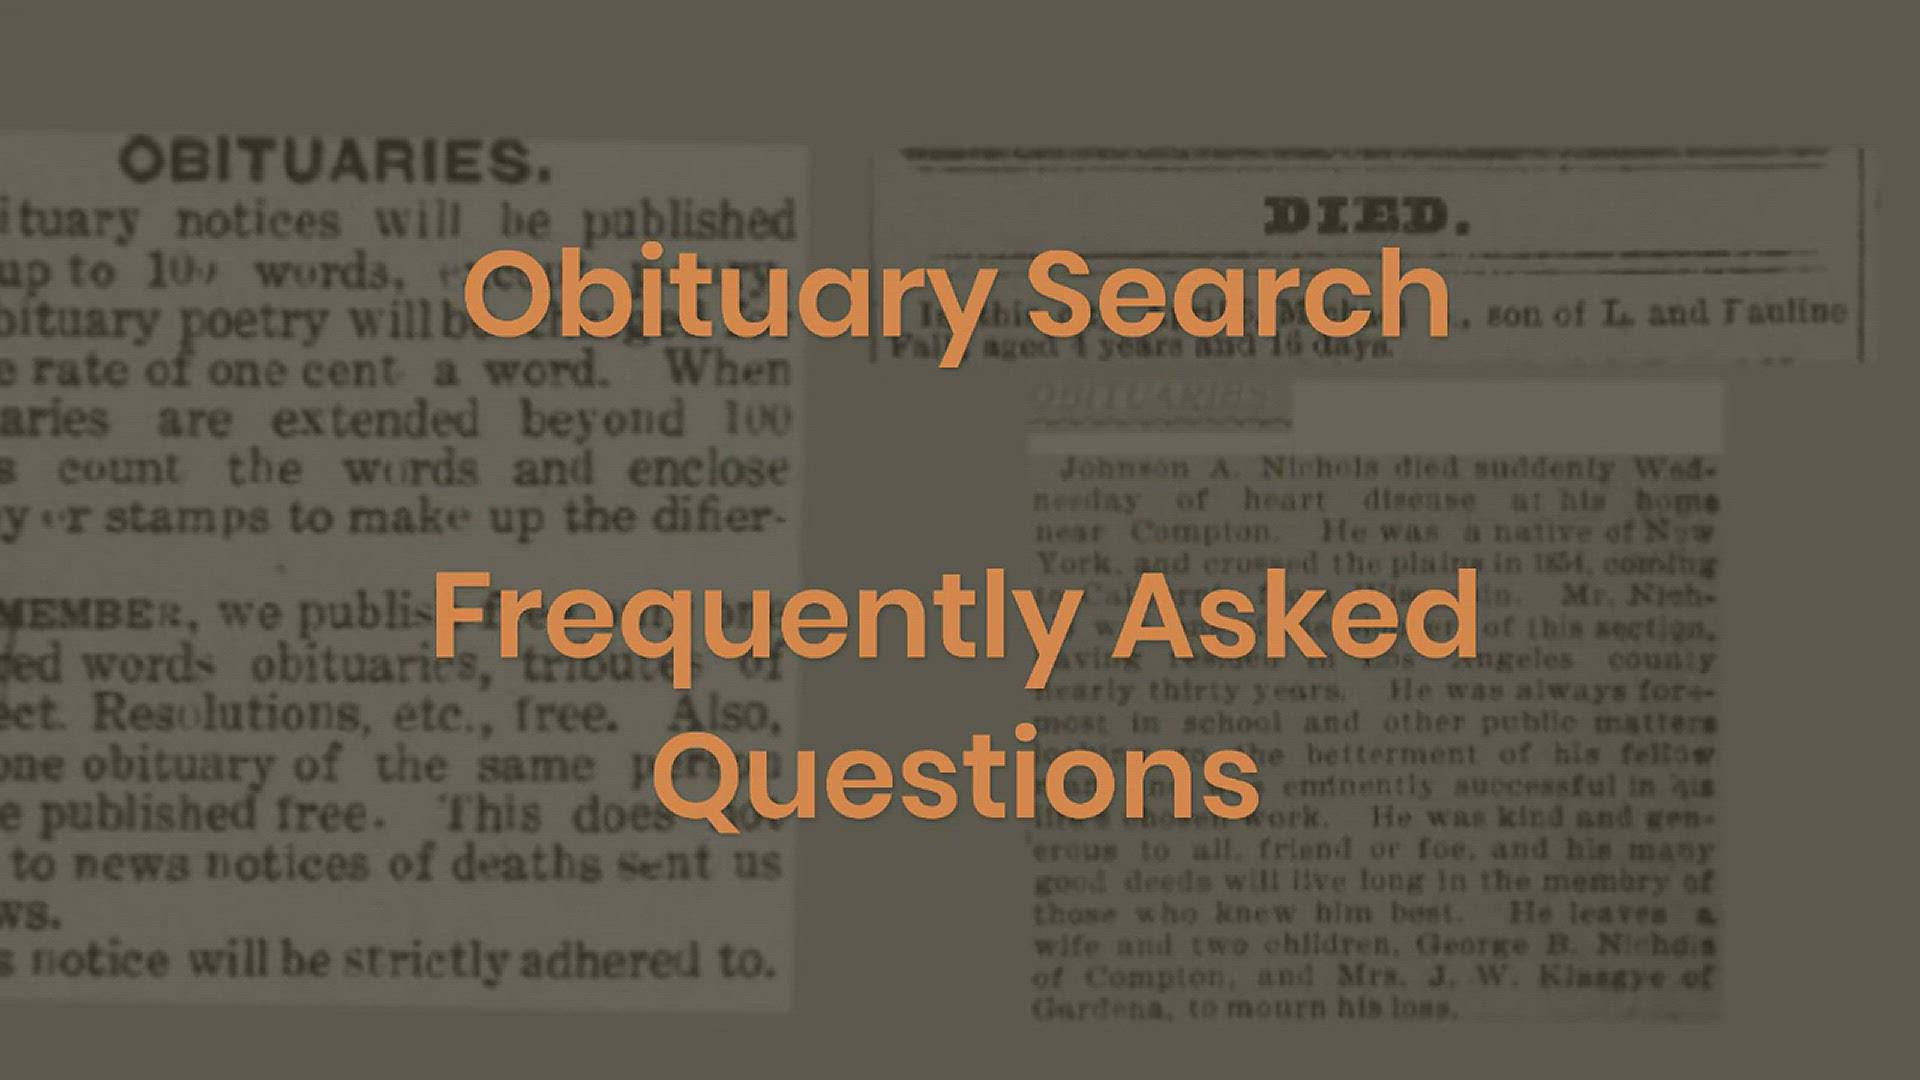 'Video thumbnail for Obituary Search Frequently Asked Questions'